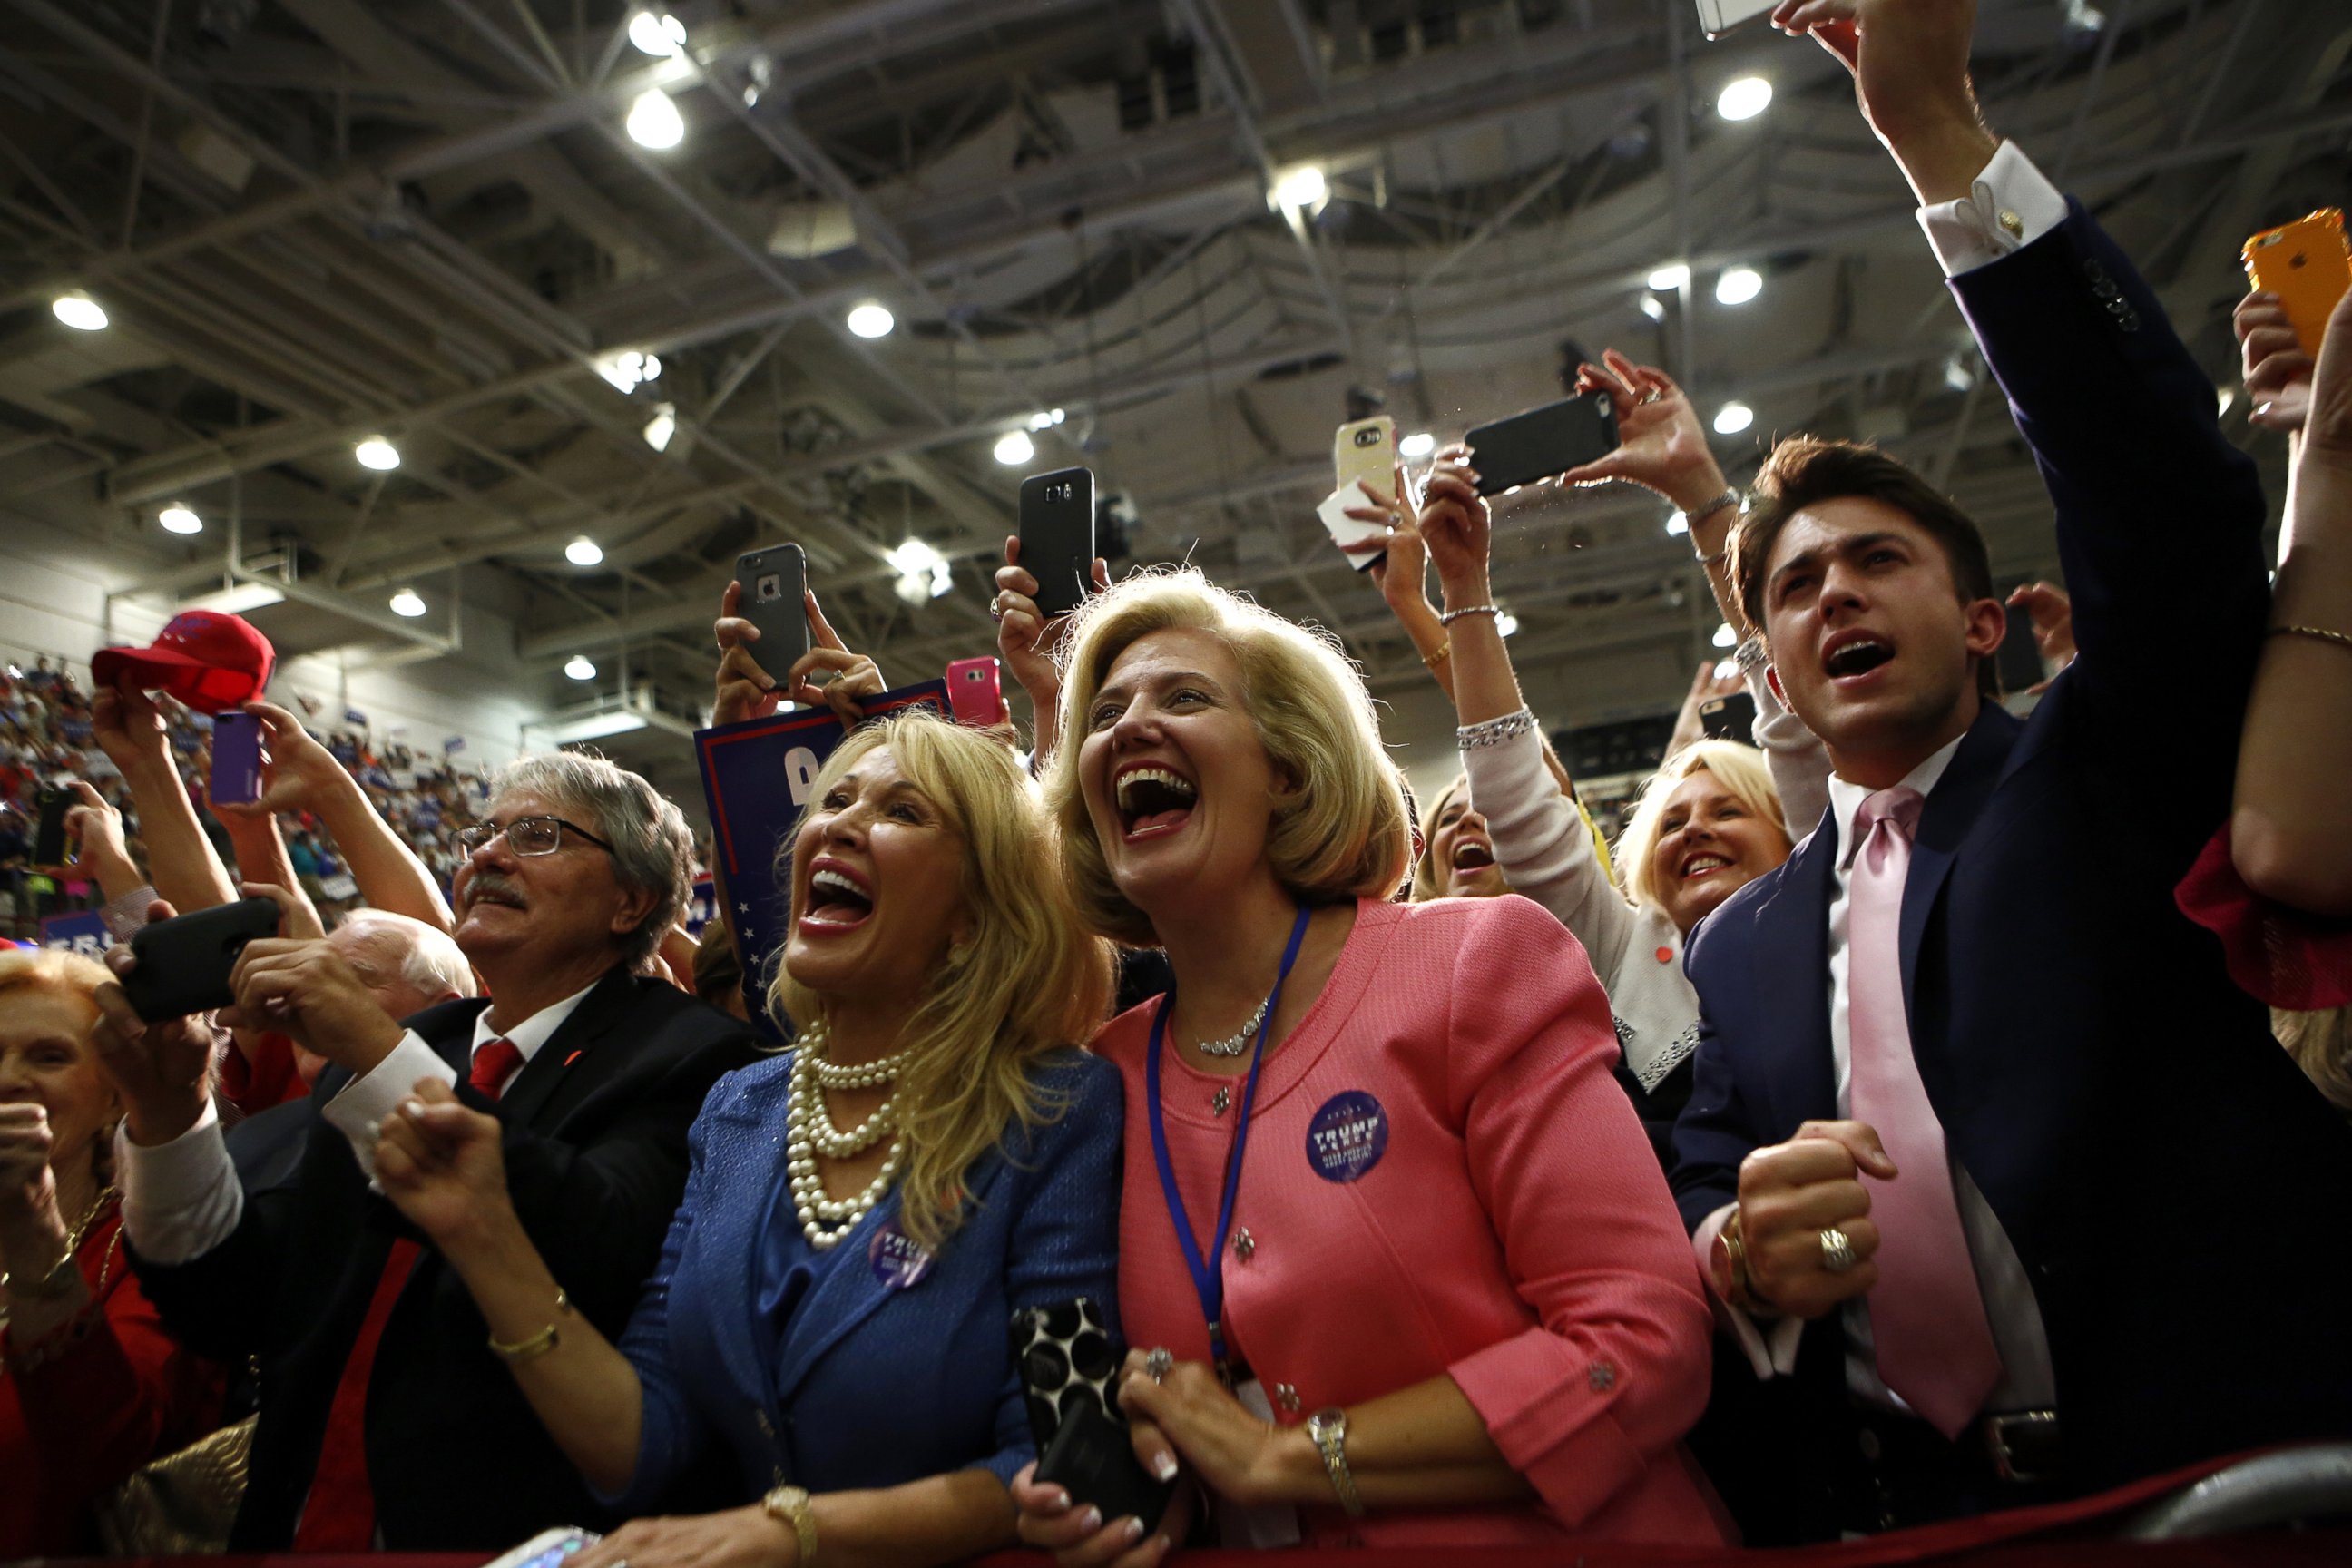 PHOTO: Supporters react as Republican presidential candidate Donald Trump takes to the stage at a rally, on Sept. 12, 2016, at U.S. Cellular Center in Asheville, North Carolina. 